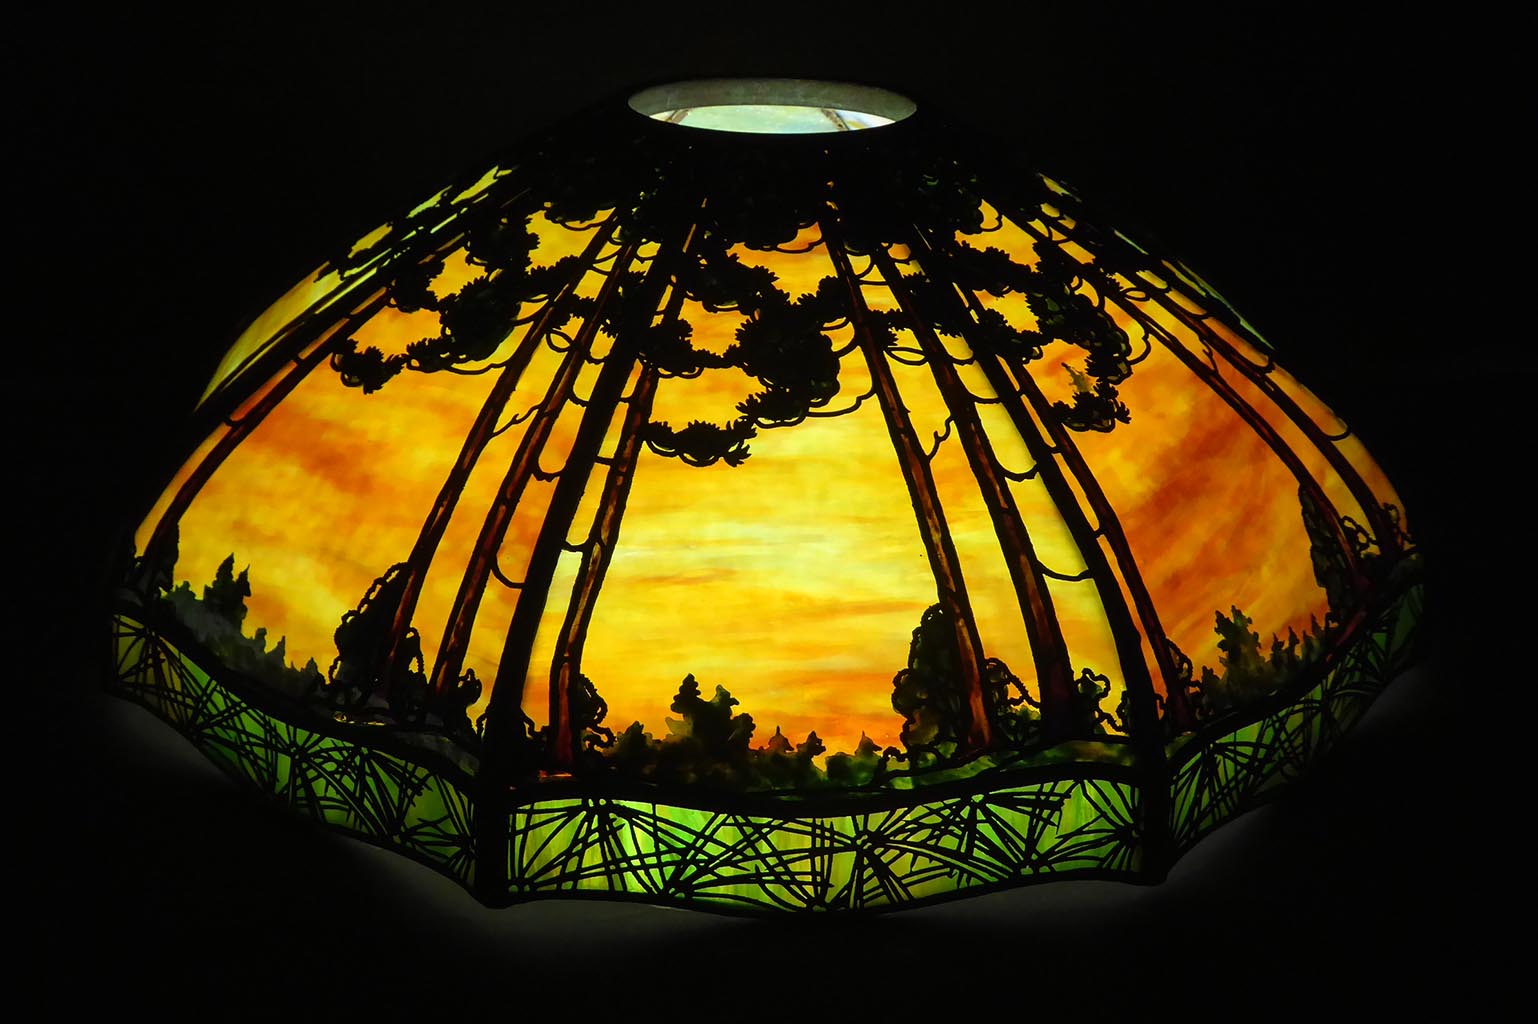 Chinese motif metalwork backed by fiery glass in the lamp body and a medium green glass at the skirt